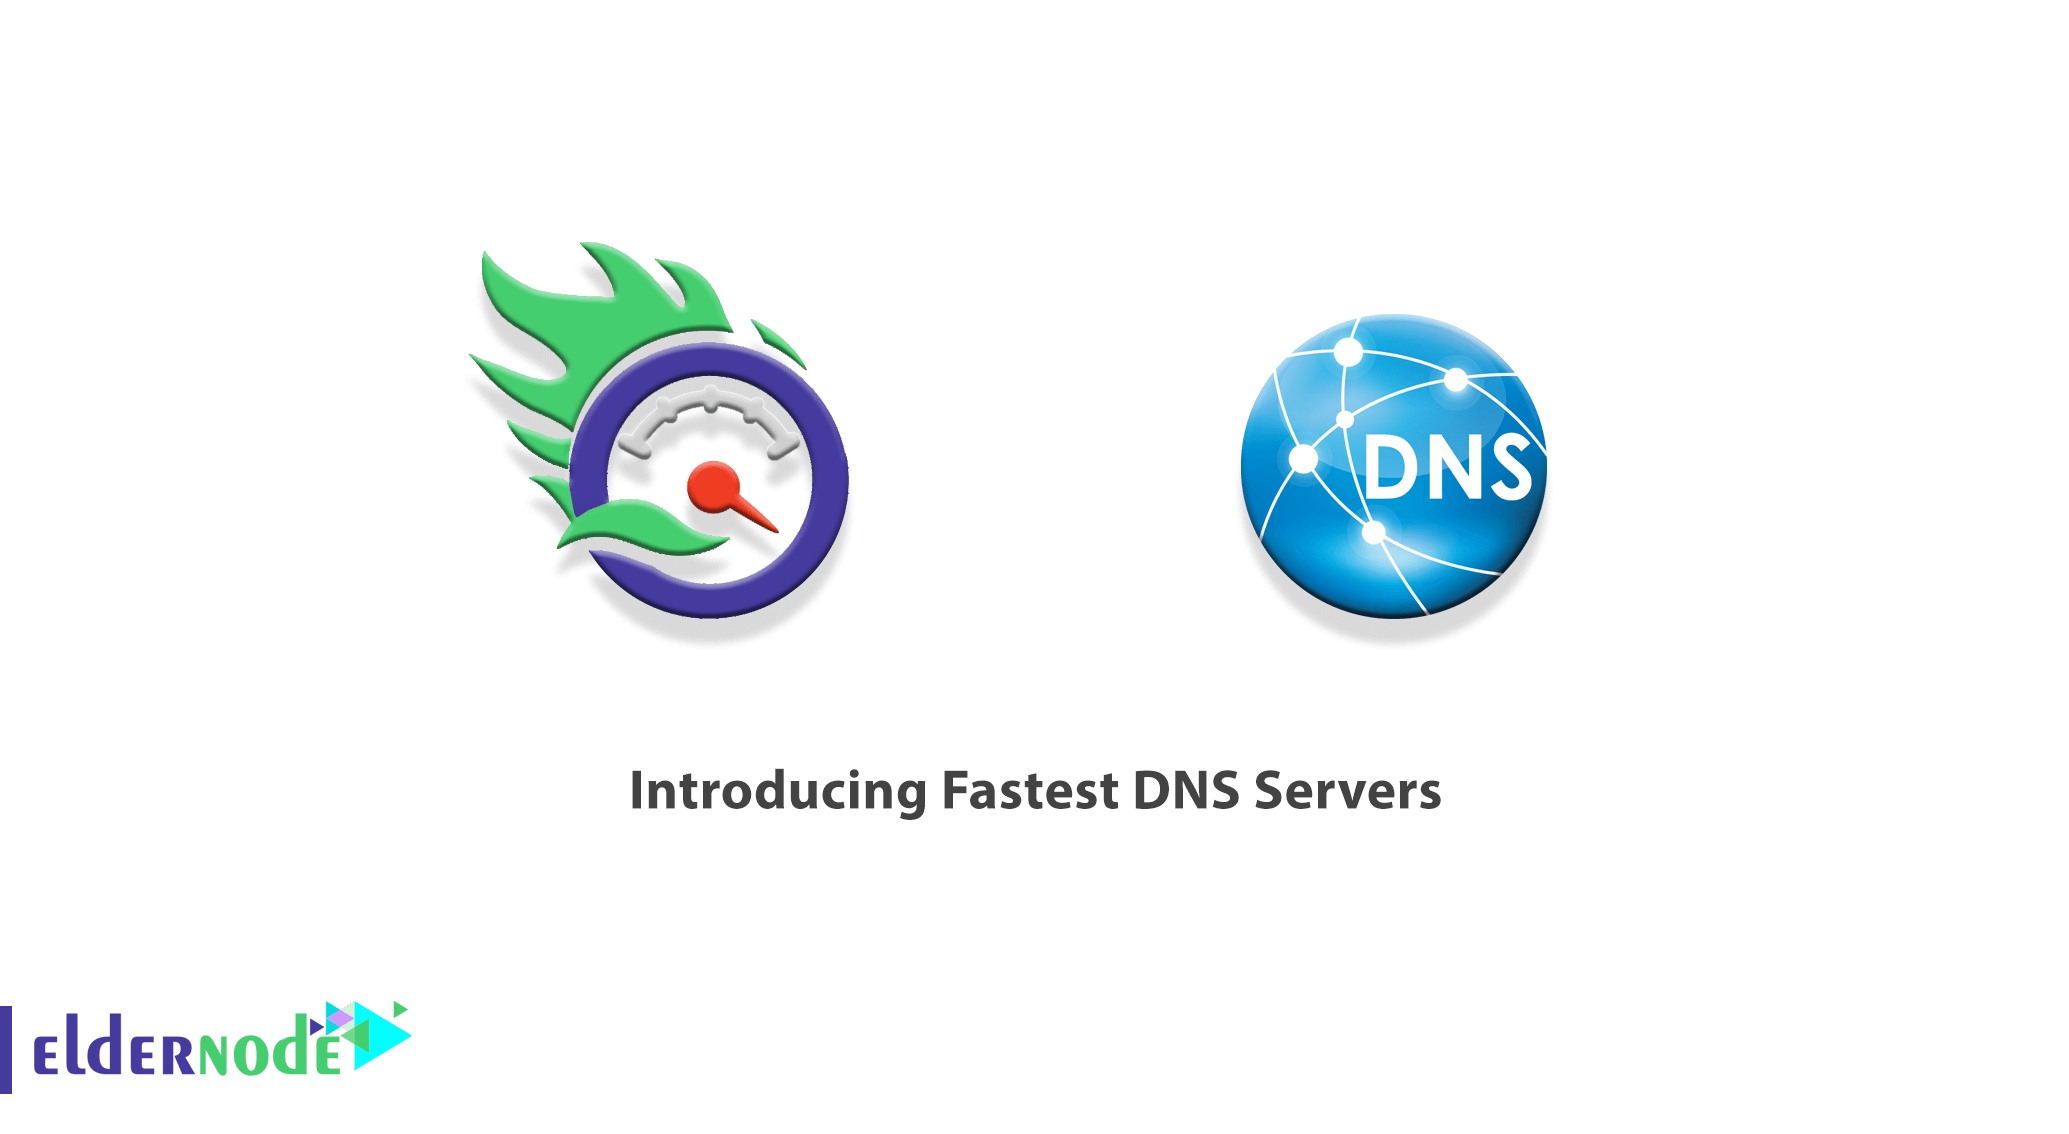 Introducing Fastest DNS Servers